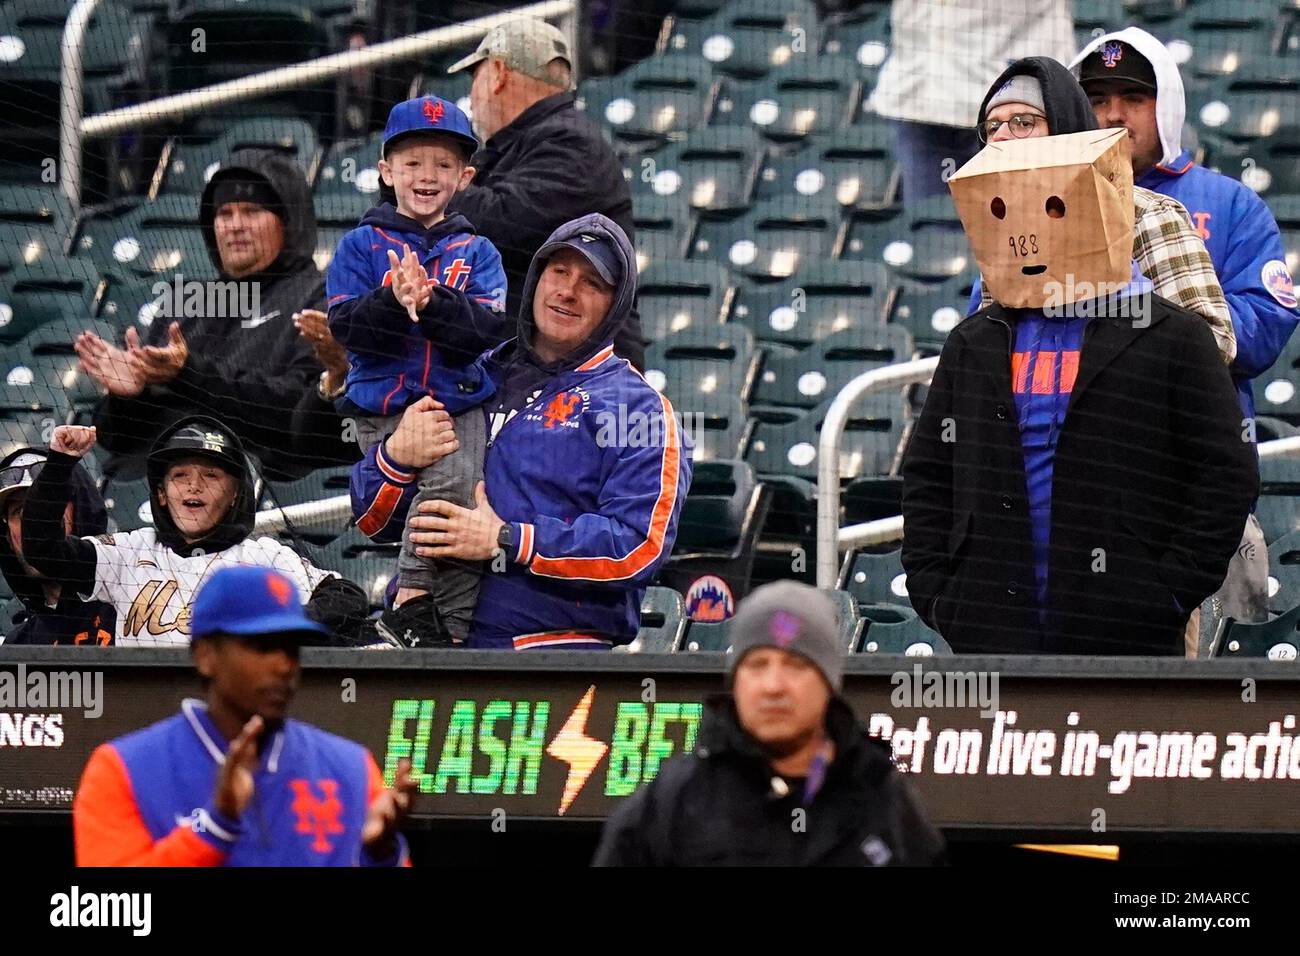 New York Mets fans, one wearing a paper bag over their head, watch